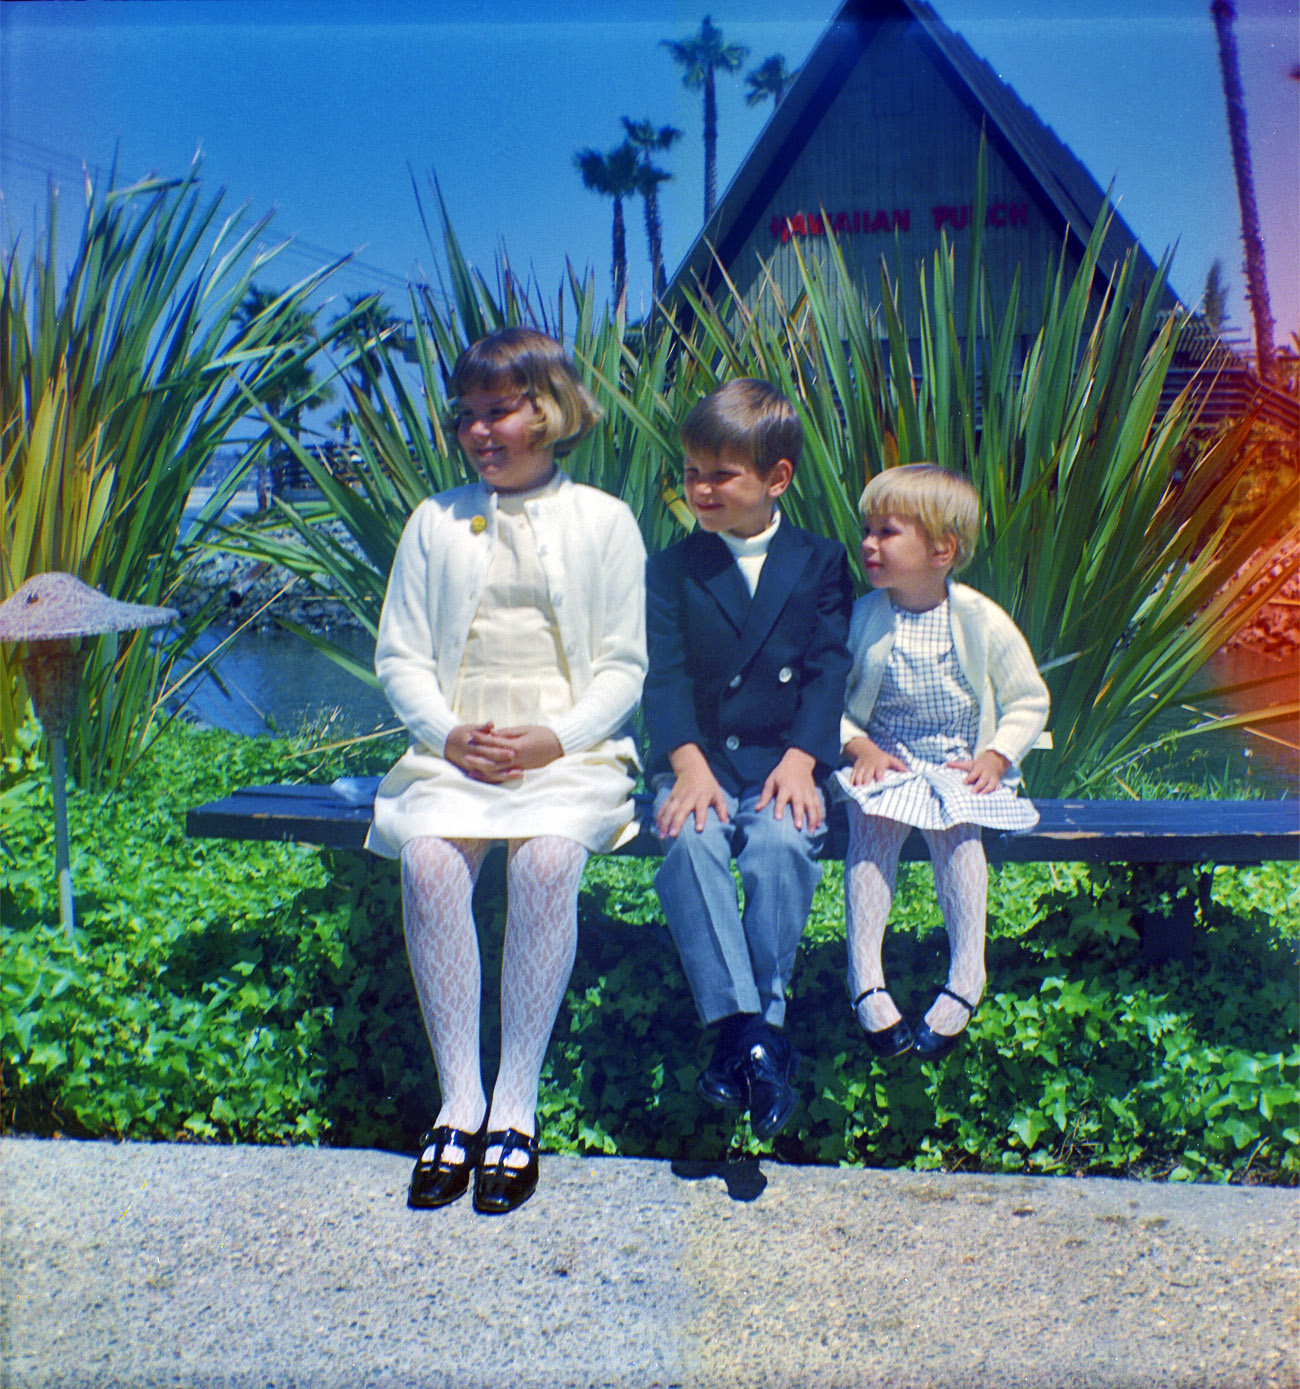 This picture was taken in 1967 at the San Diego SeaWorld. That's my dad in the middle and his sisters on the sides. They don't look like they're dressed to get splashed by Shamu. This commenter left a nice description of what the Hawaiian Punch restaurant behind them was like. View full size.